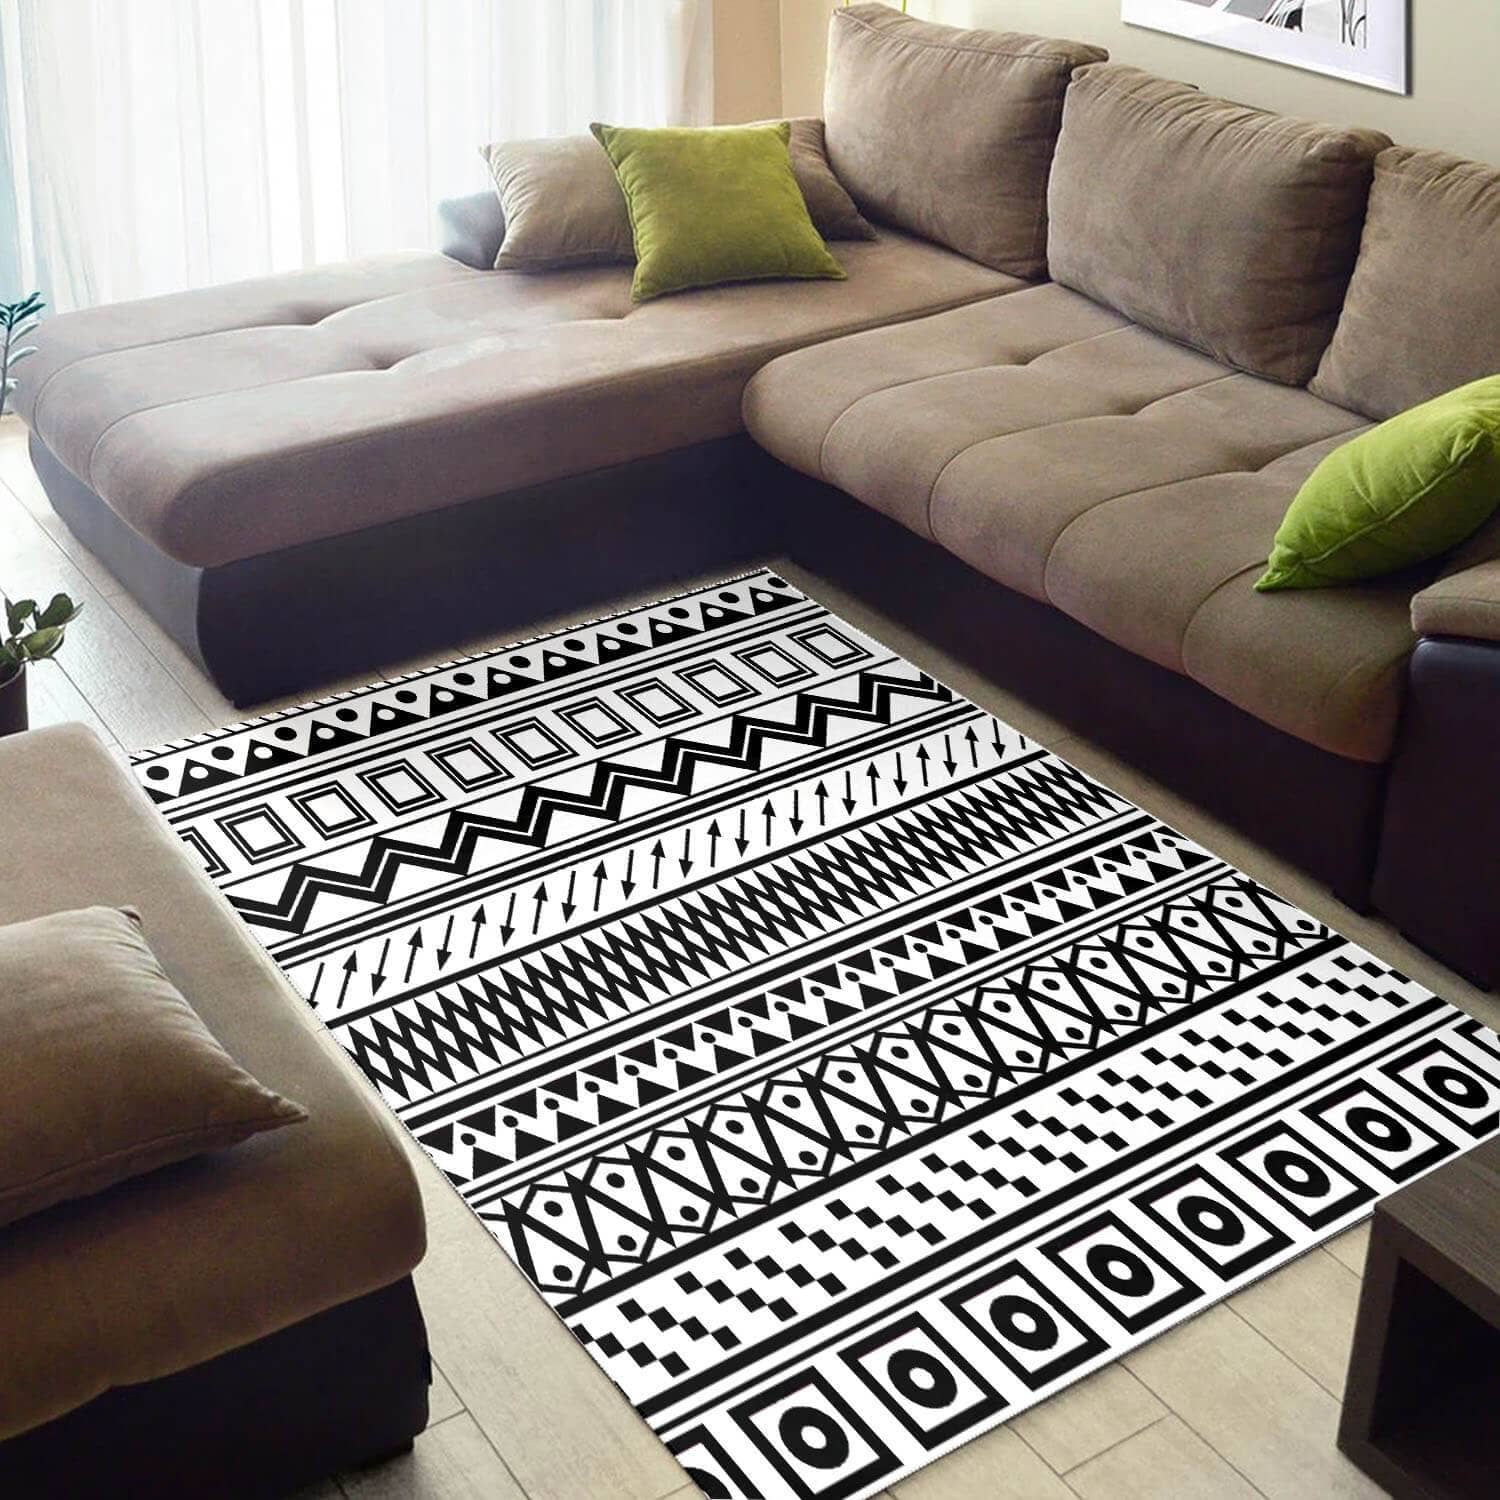 Beautiful African Style Abstract American Black Art Ethnic Seamless Pattern Large Inspired Living Room Rug